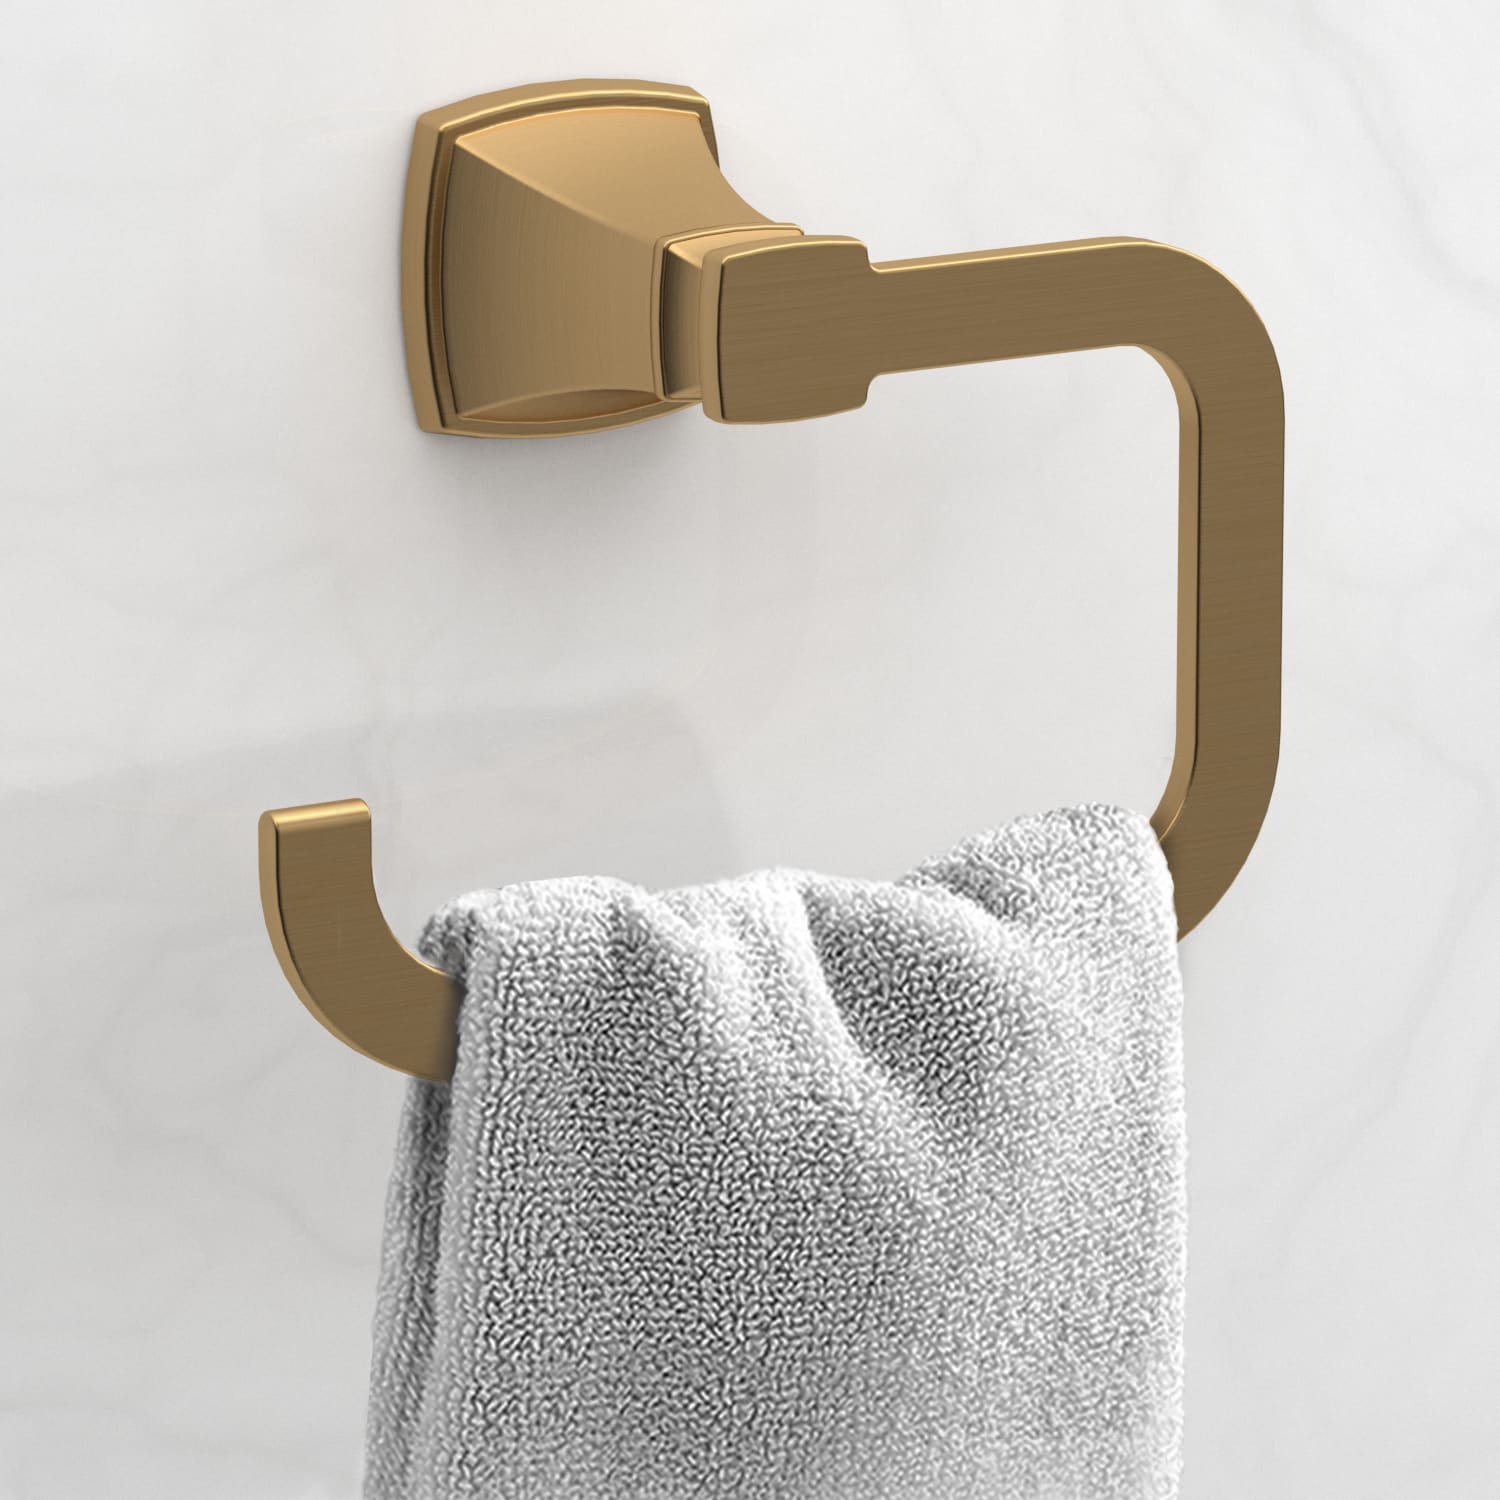 1pc Gold Color No Drill Towel Bar, Paper Roll Holder, Shower Caddy For  Bathroom Wall